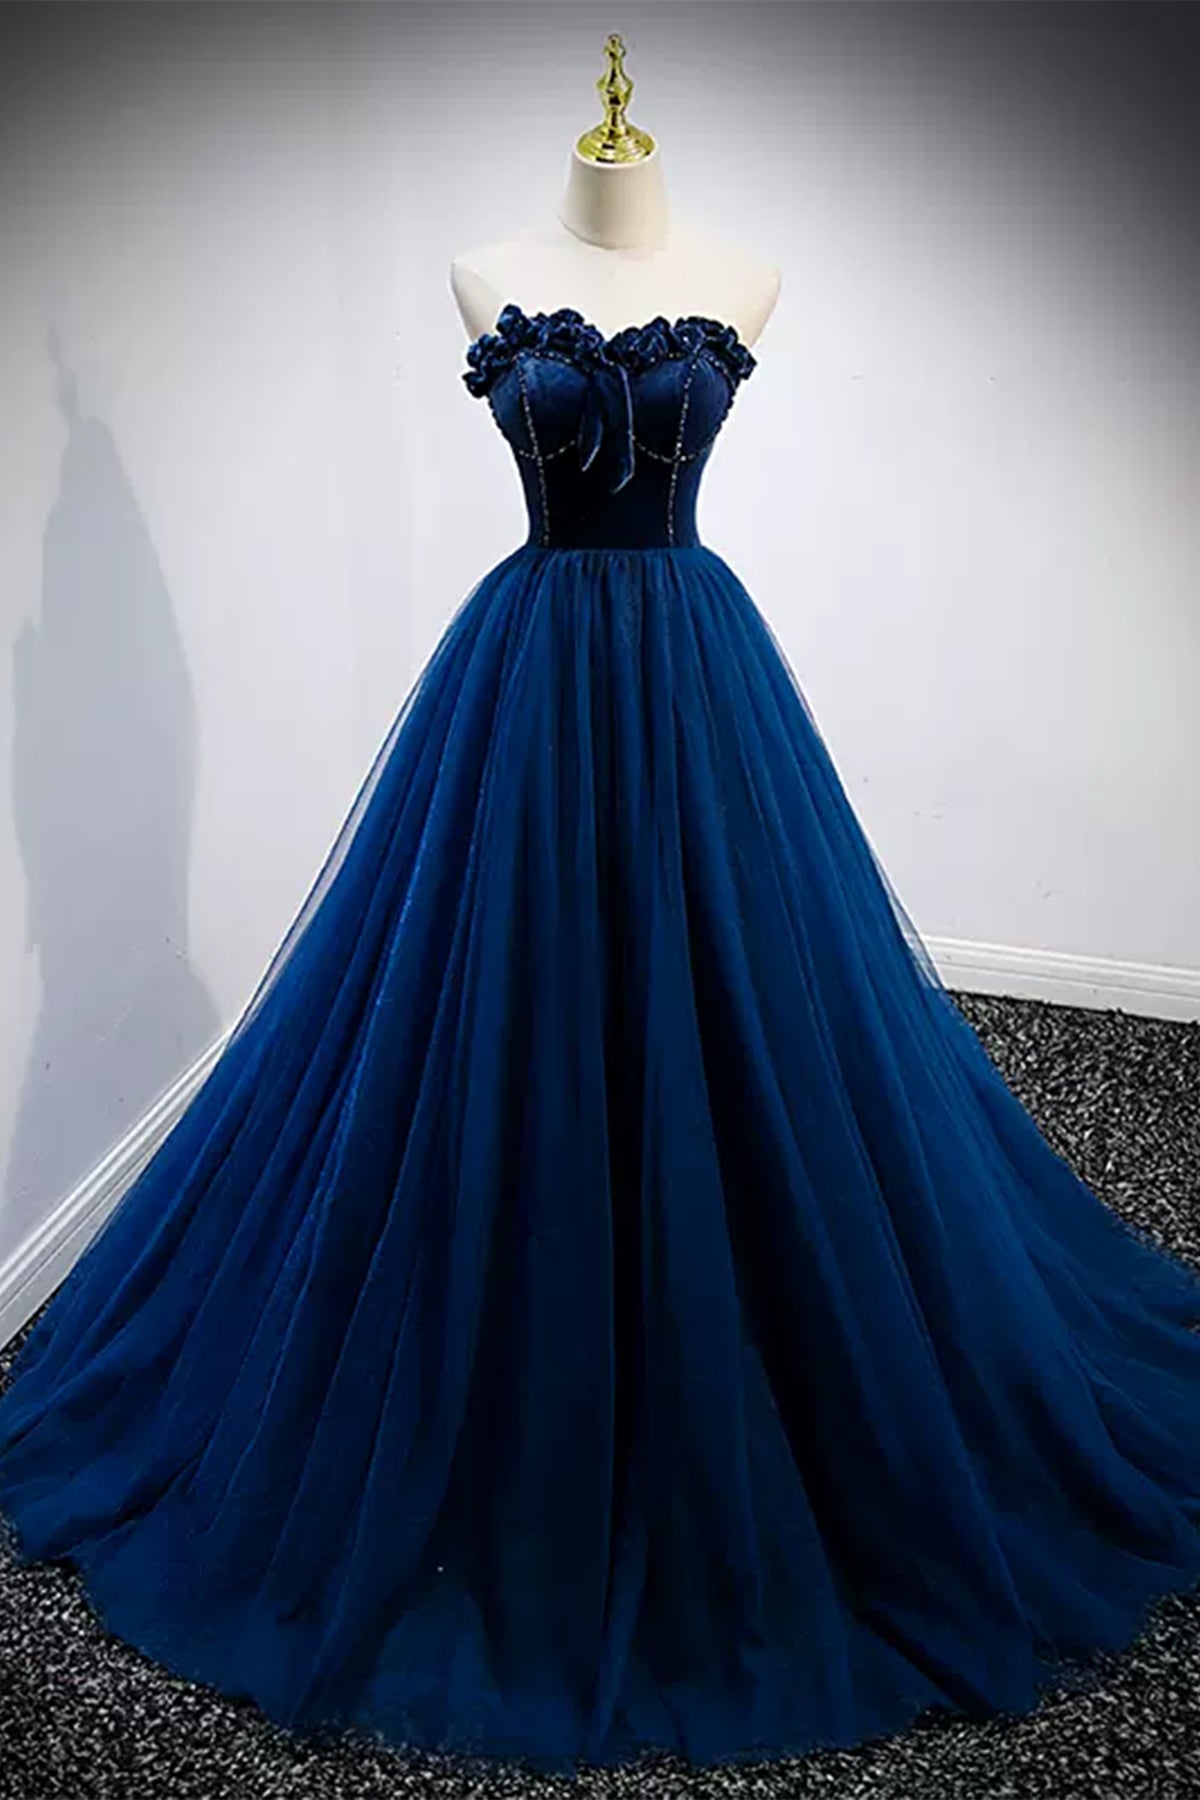 Unique Strapless Blue Tulle Long Prom Dresses, Blue Formal Evening Dresses, Ball Gown WT1234